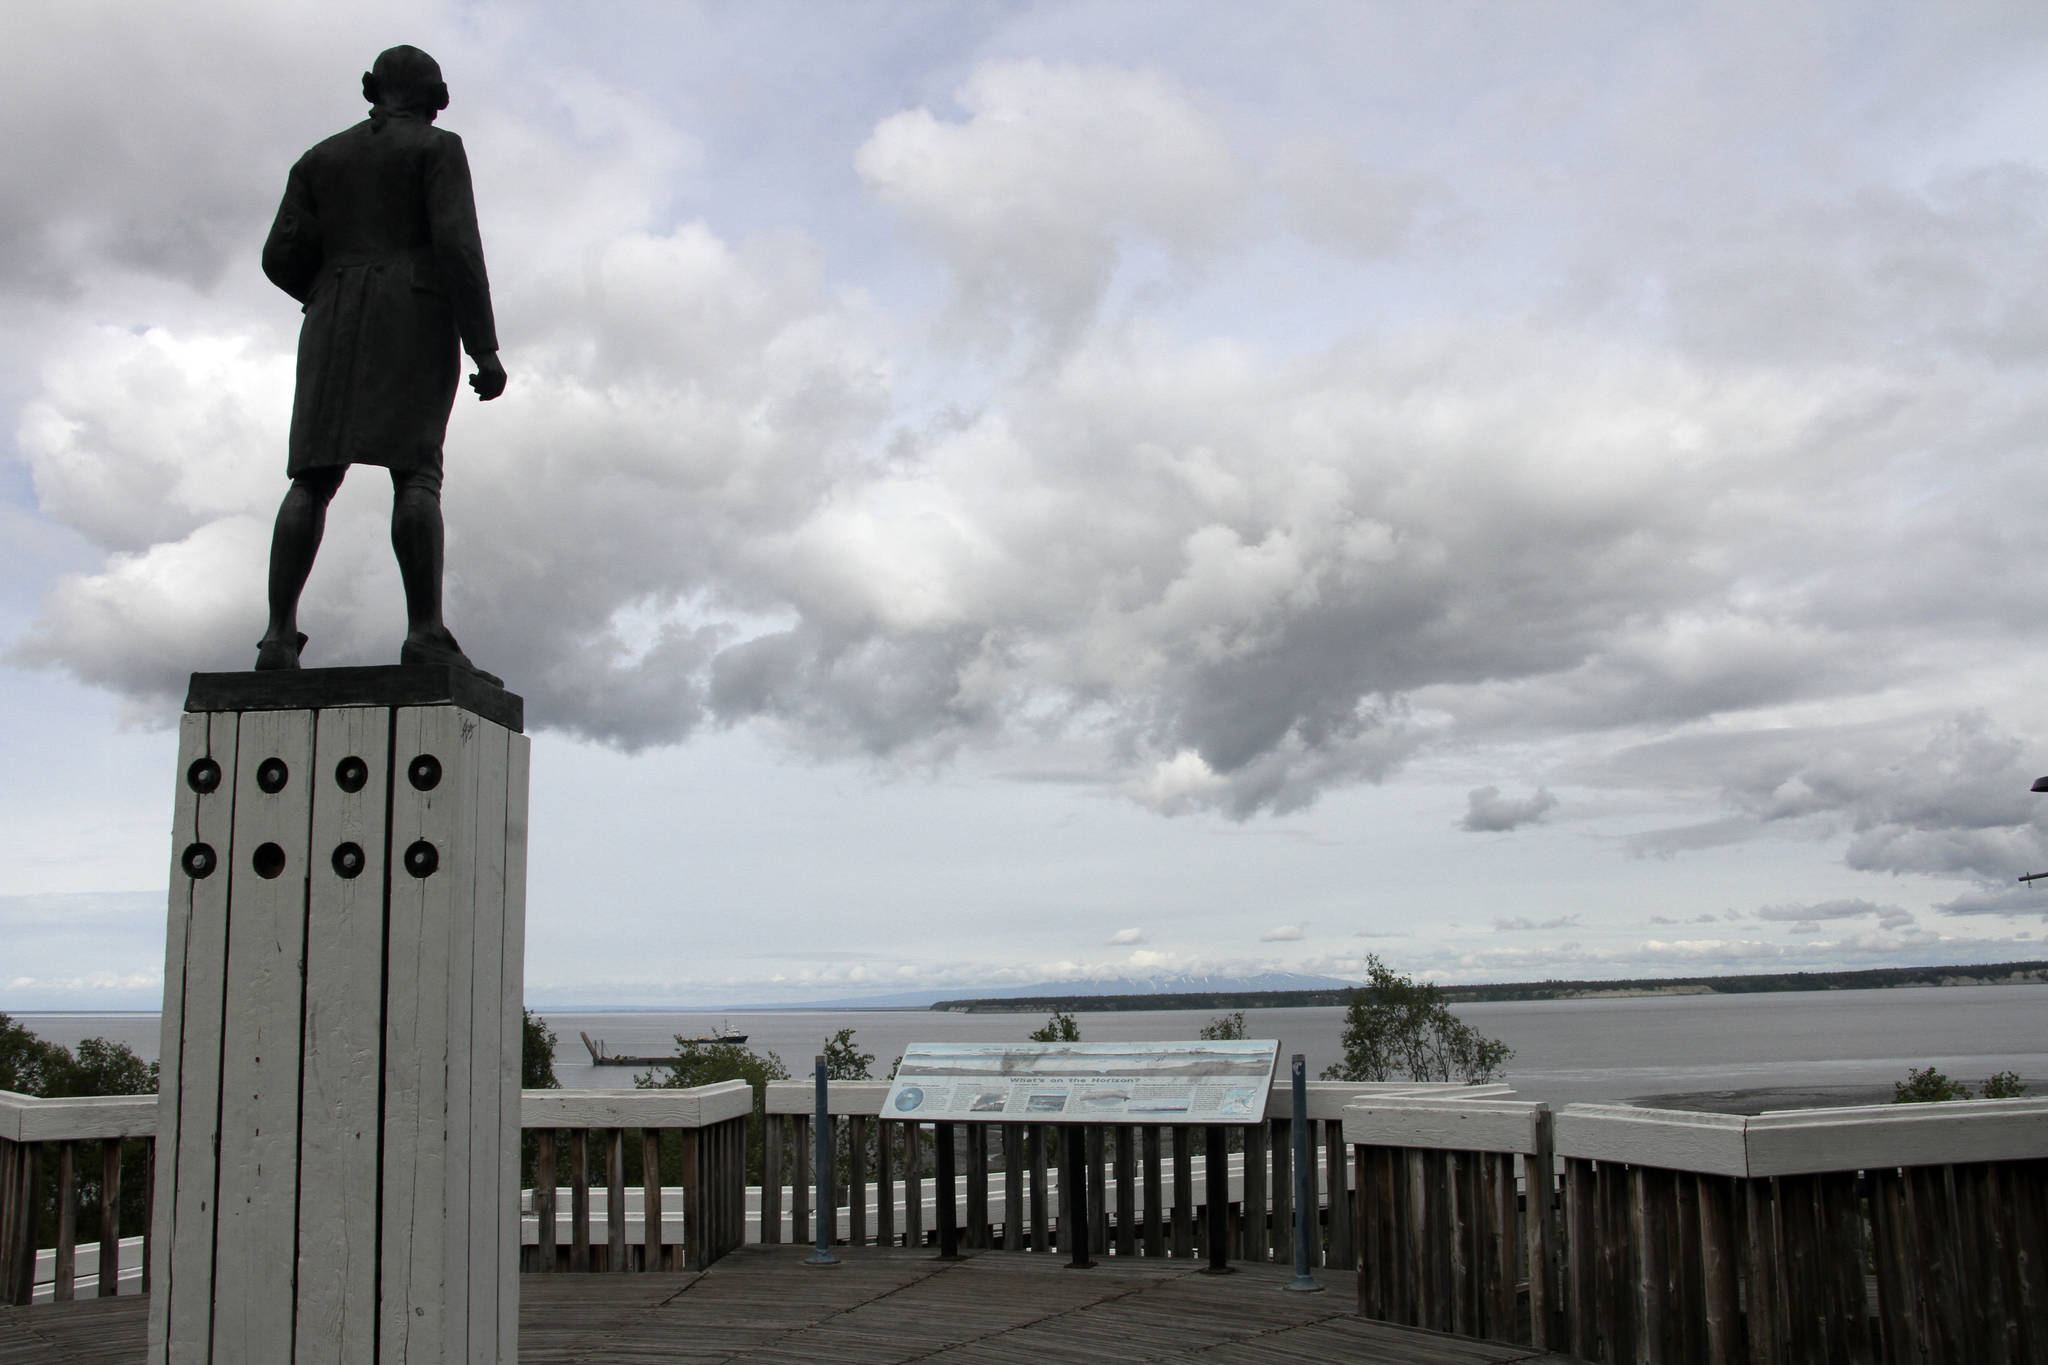 The Captain James Cook statue facing the inlet that bears his name and fronts Alaska’s largest city in downtown Anchorage is seen on June 23, 2020. Far away from Confederate memorials, Alaska residents have joined the movement to eliminate statues of colonialists accused of abusing and exploiting Indigenous people. The effort has already resulted in a statue of Russian America colonialist Alexander Baranov being taken out of public view in one city. Others want statutes removed of U.S. Secretary of State and Alaska purchase architect William Seward and Capt. James Cook. (AP Photo/Mark Thiessen)